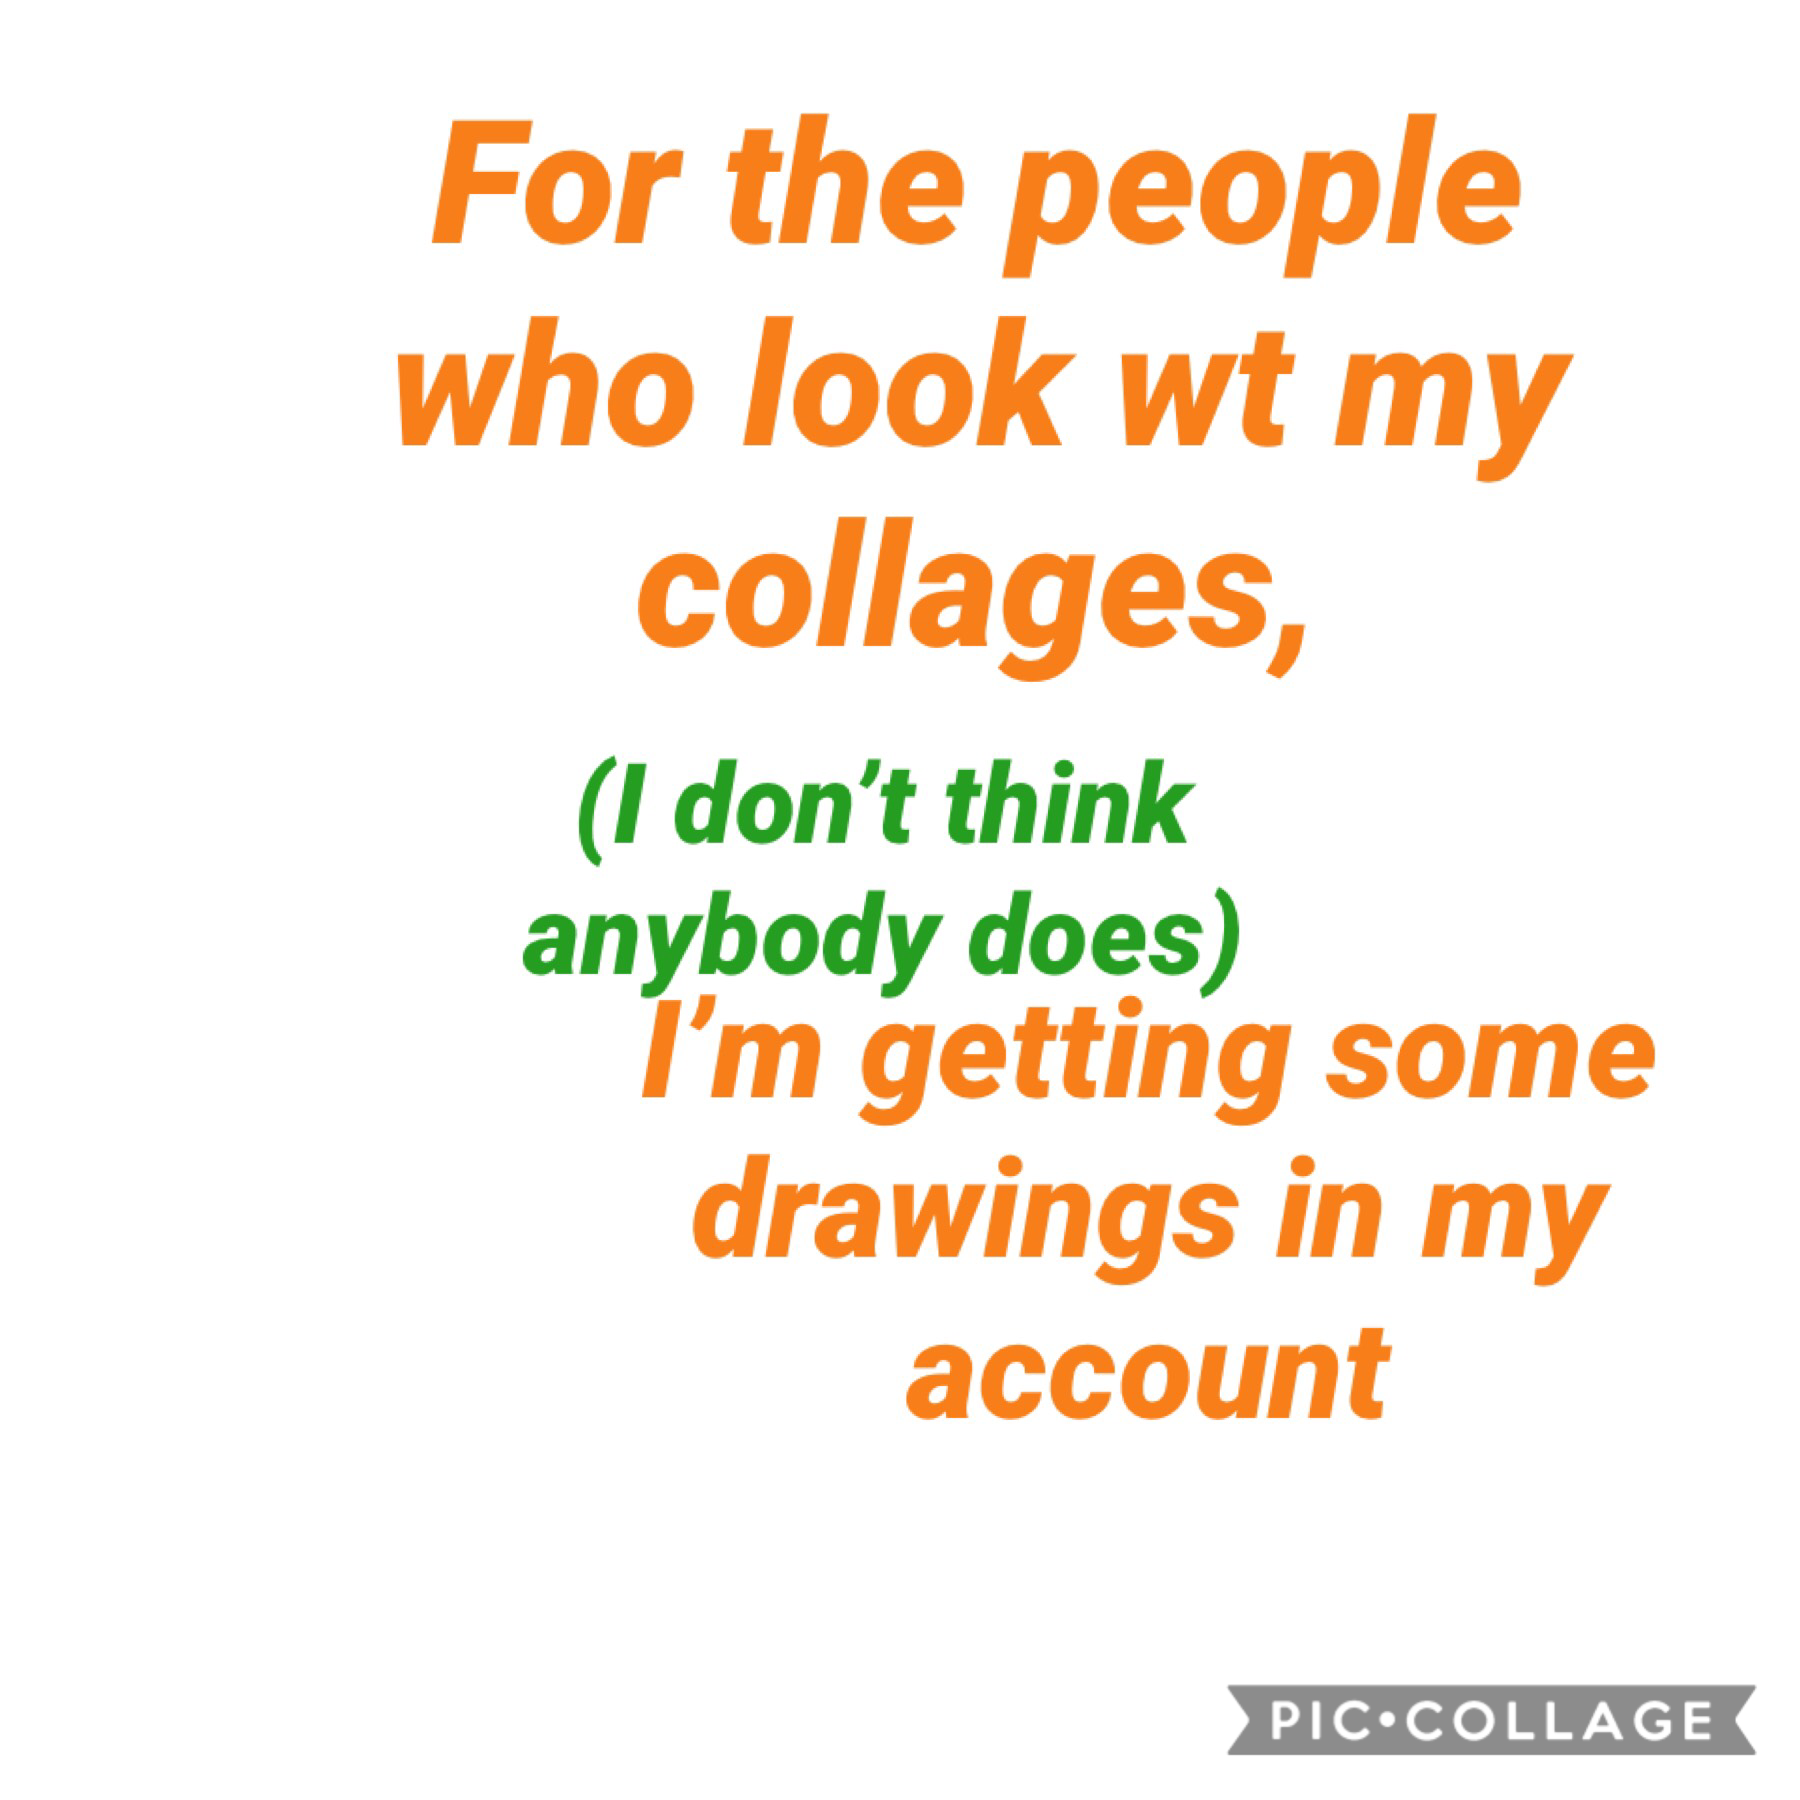 I’m doing some things in my account